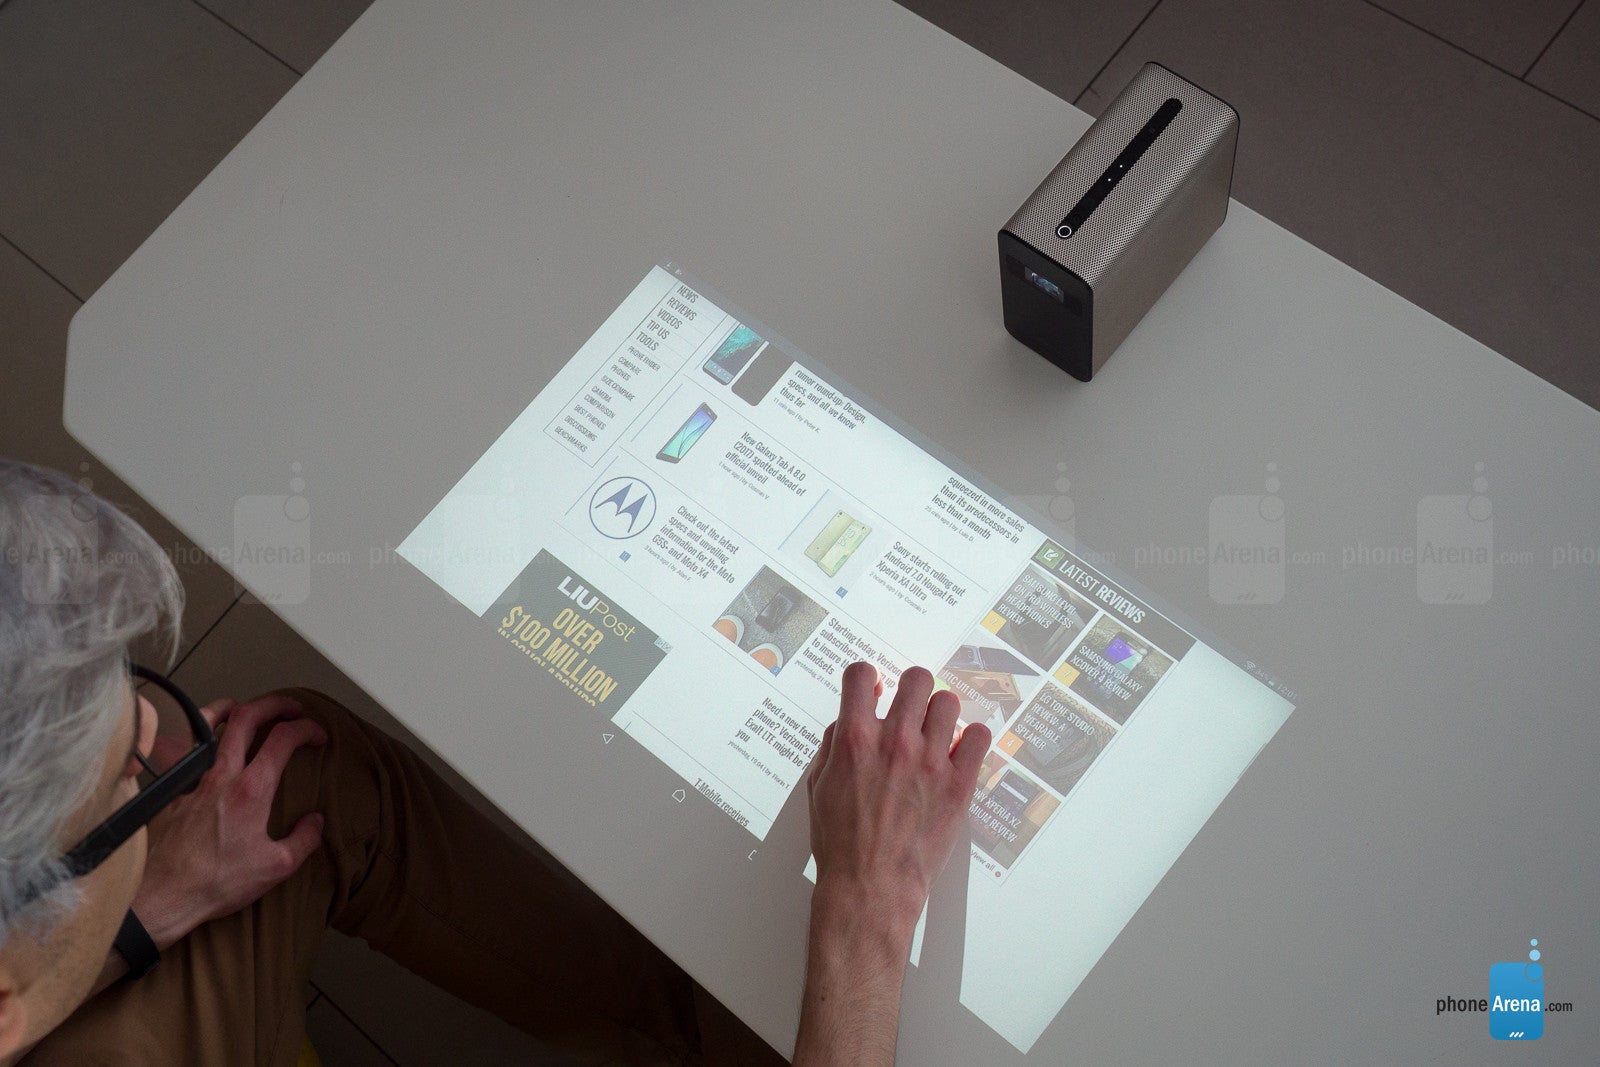 Sony Xperia Touch Android projector Review - PhoneArena